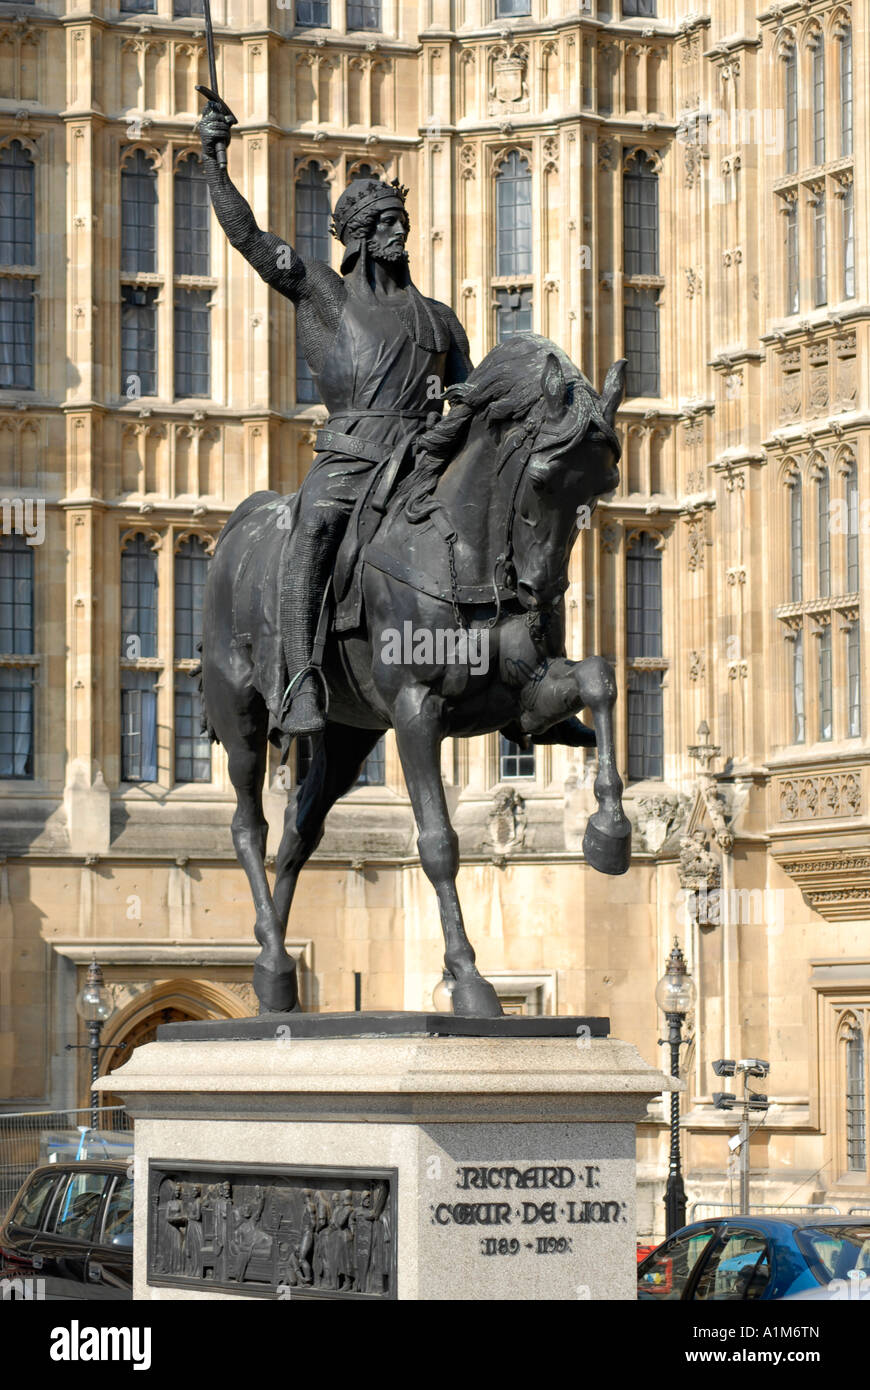 Statue of Richard I Coeur de Leon in front of the Houses of Parliament  London Stock Photo - Alamy